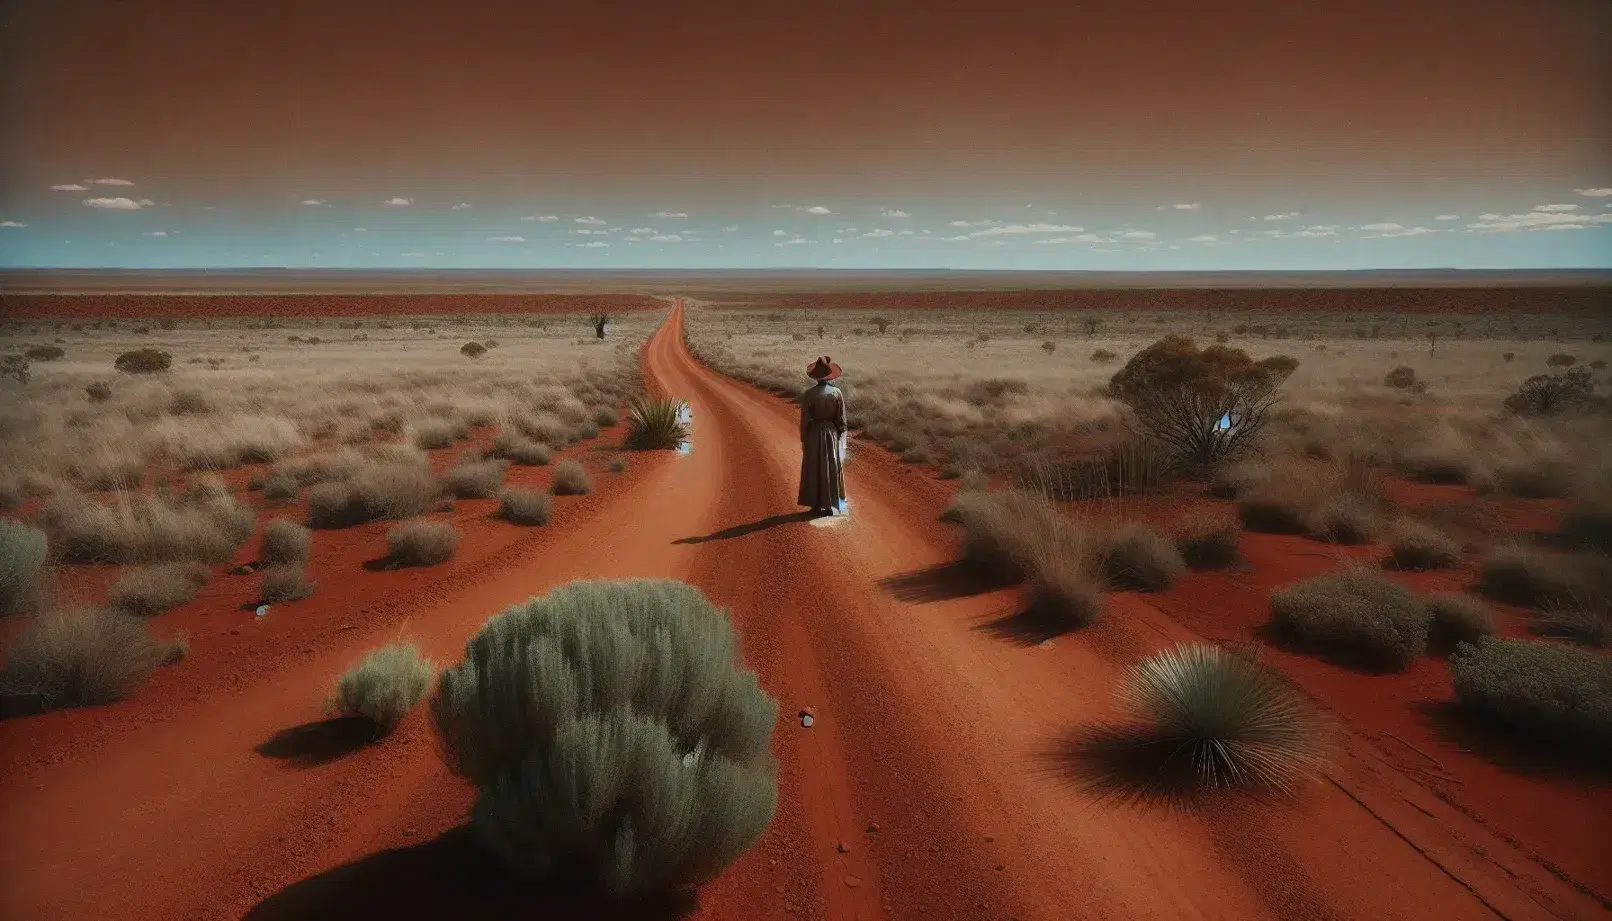 Vast arid landscape with a red dirt road winding into the horizon, a woman in earth tones stands by, under a clear blue sky with distant hills.